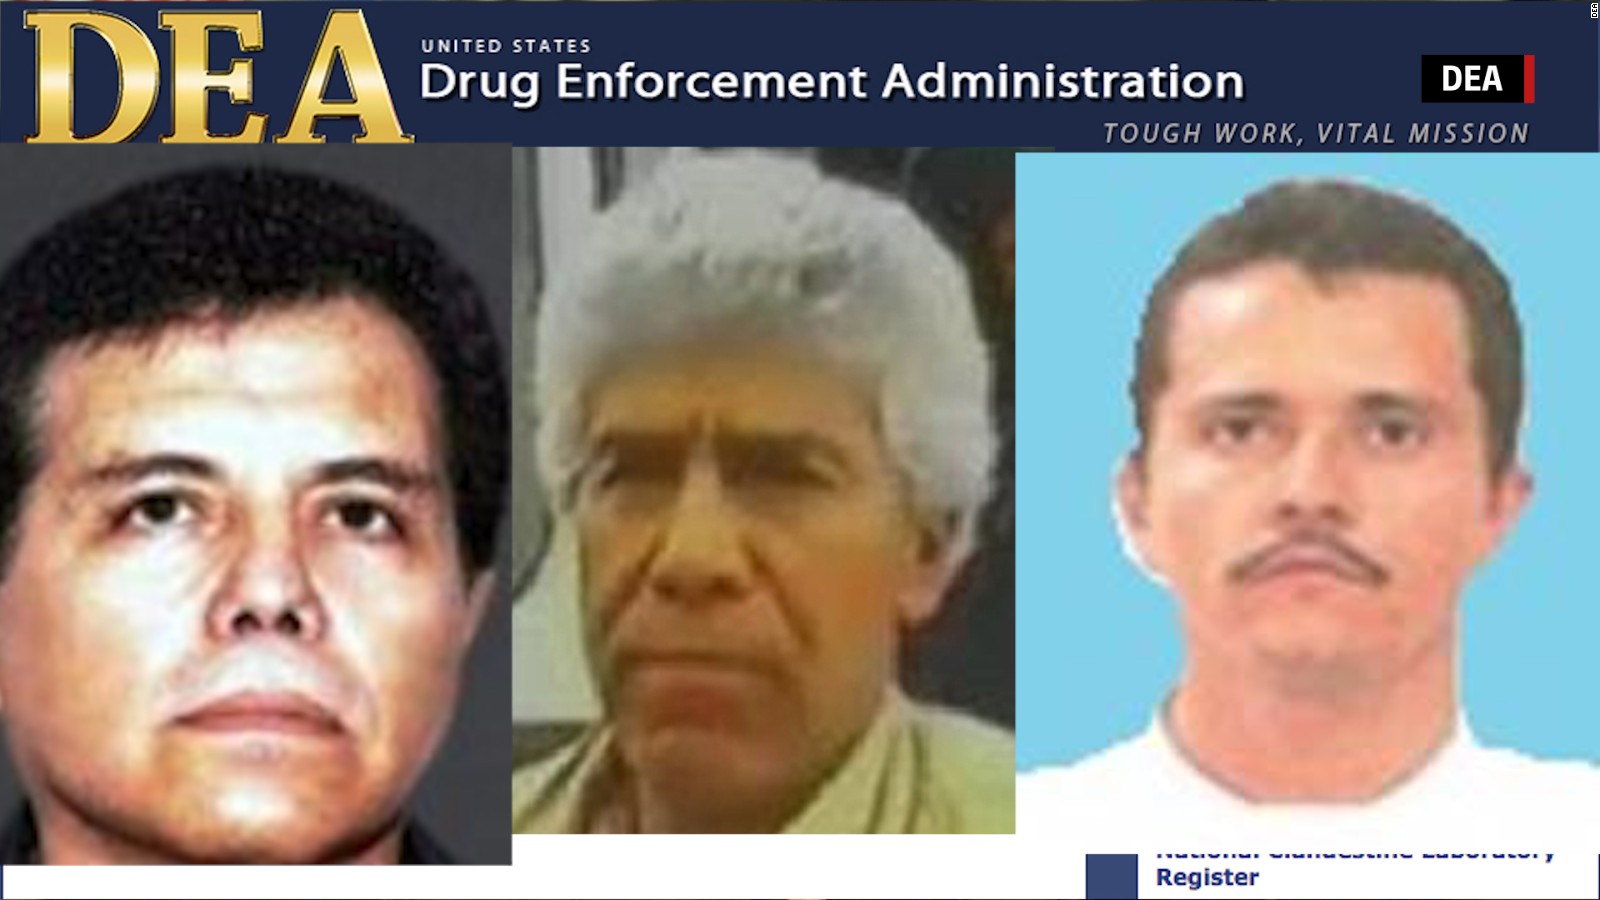 Have you heard of these drug cartel leaders? CNN Video